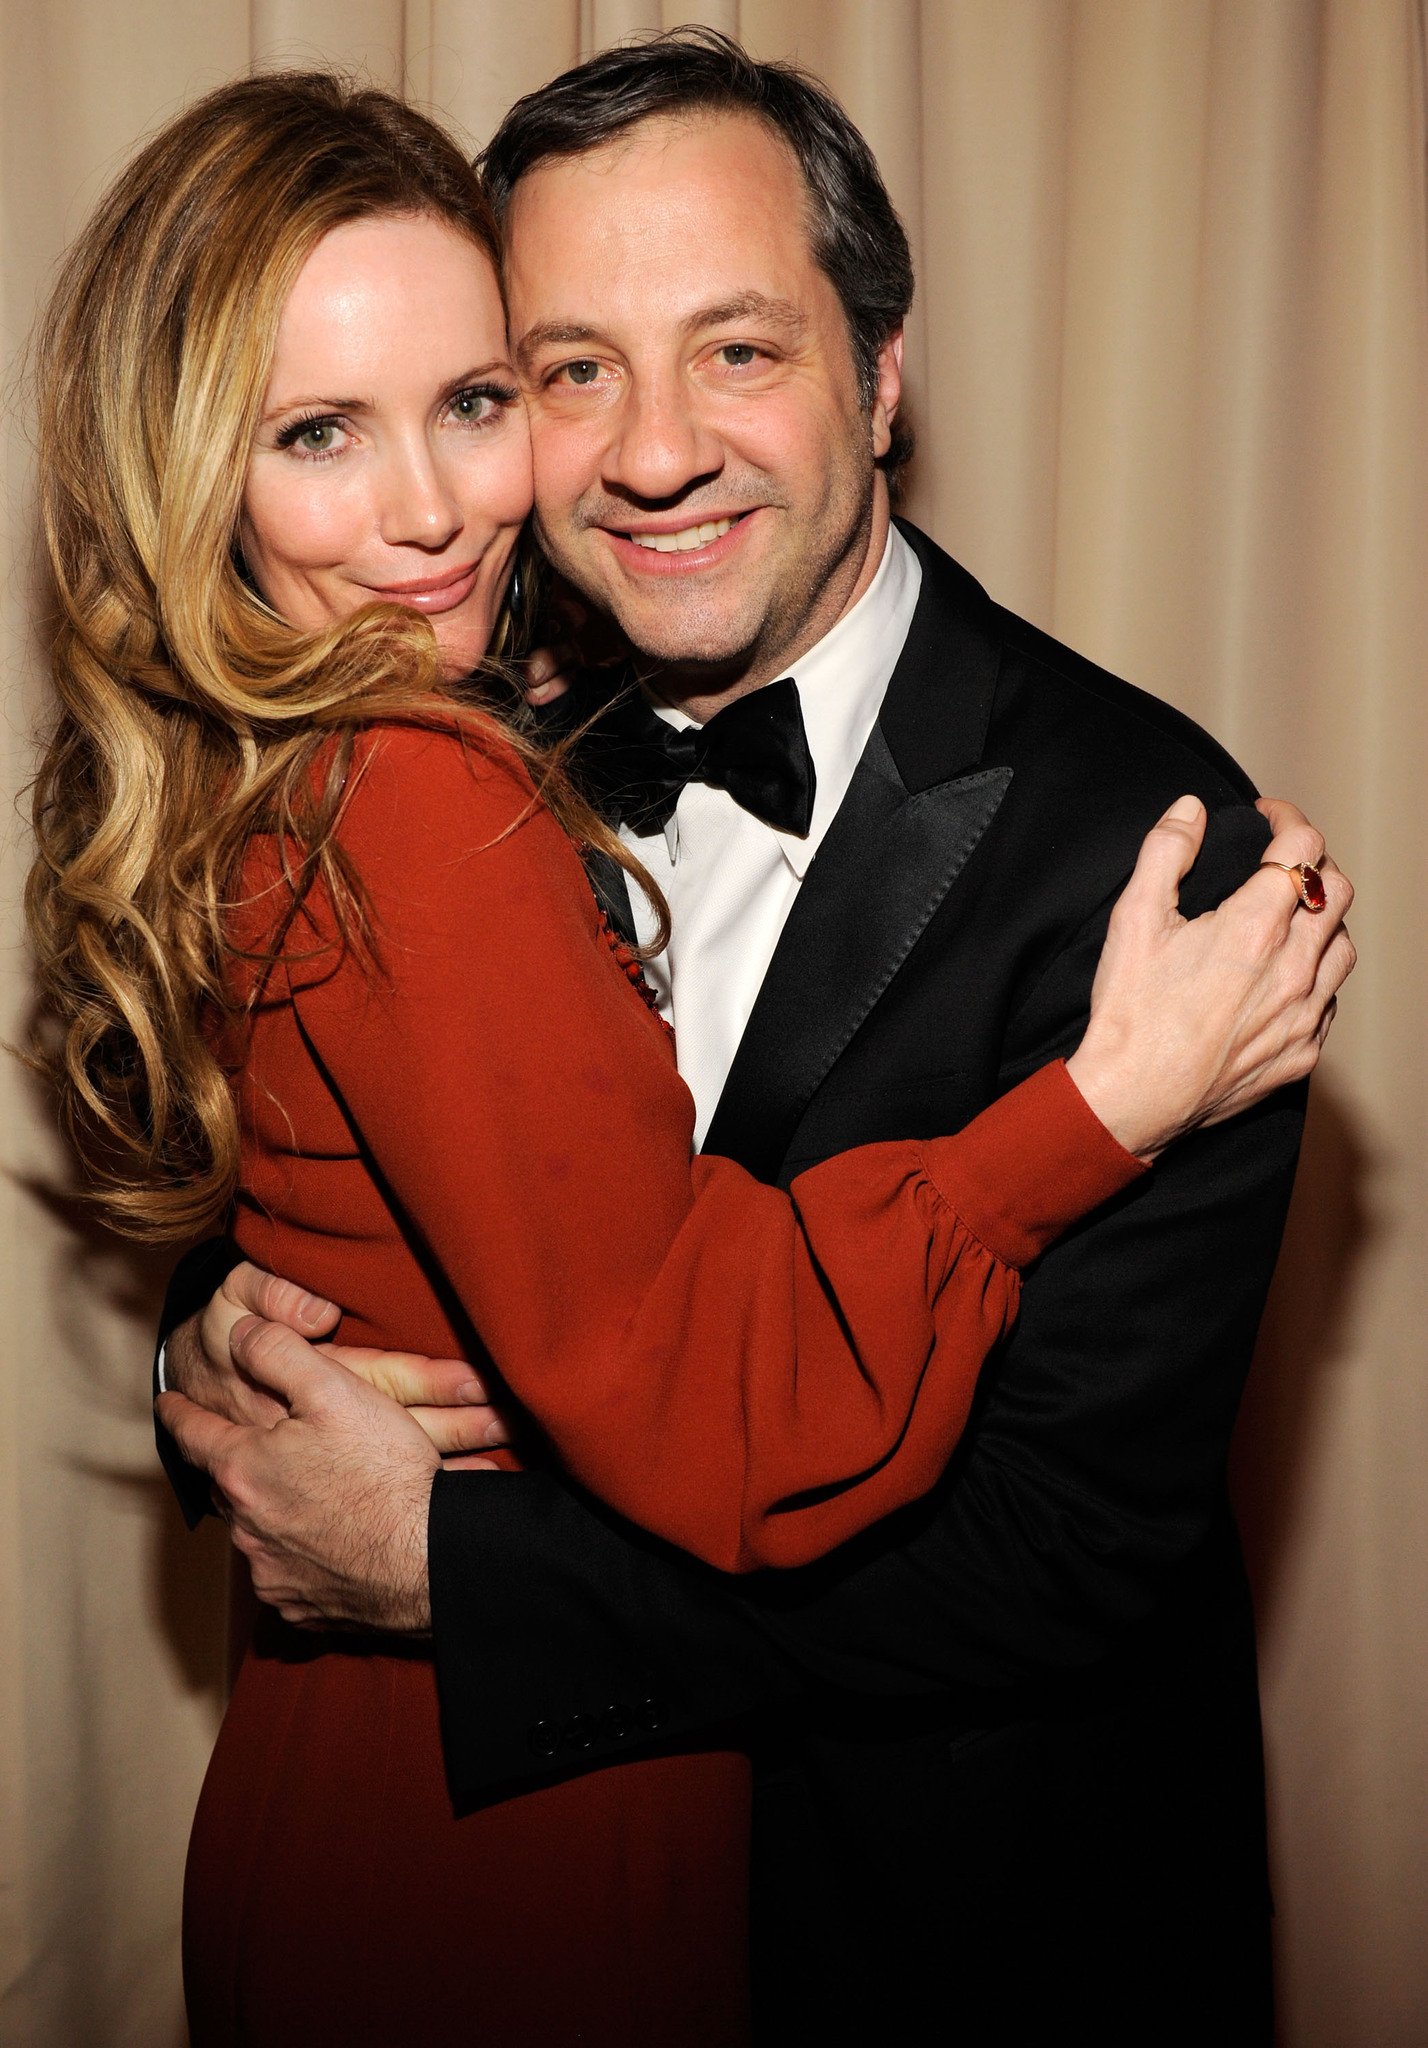 Leslie Mann and Judd Apatow